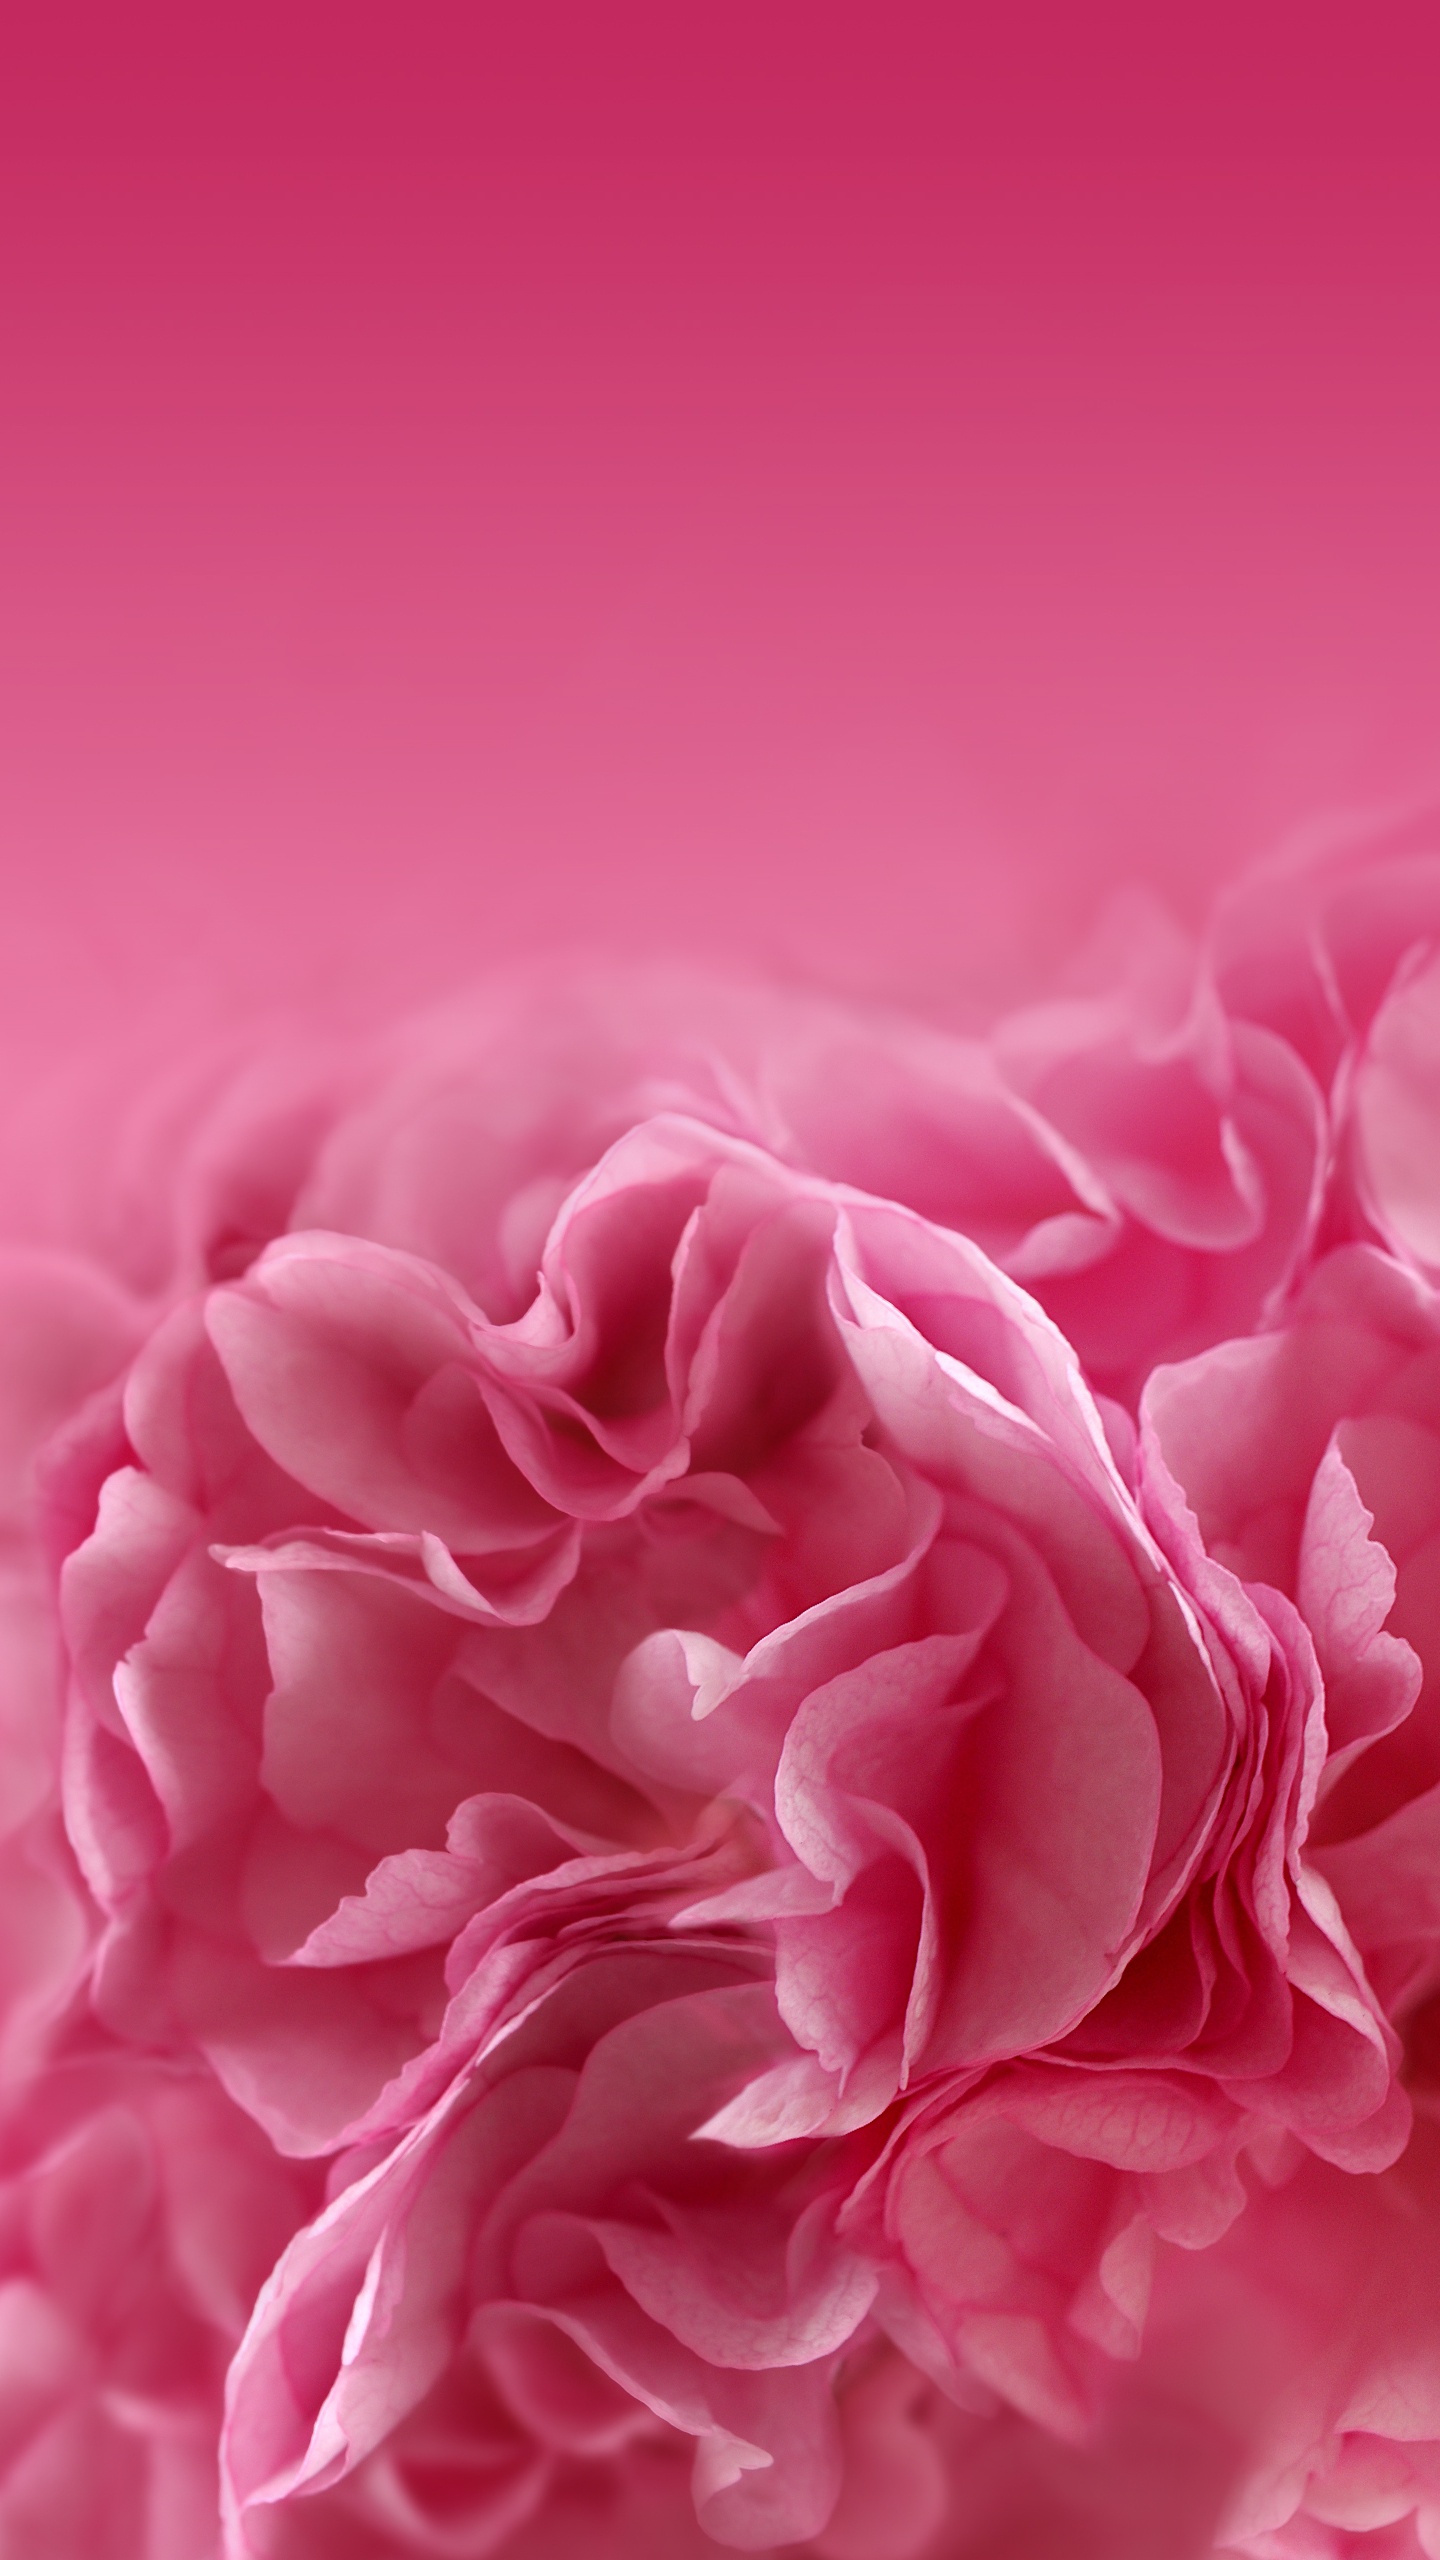 Pink Rose in Close up Photography. Wallpaper in 1440x2560 Resolution